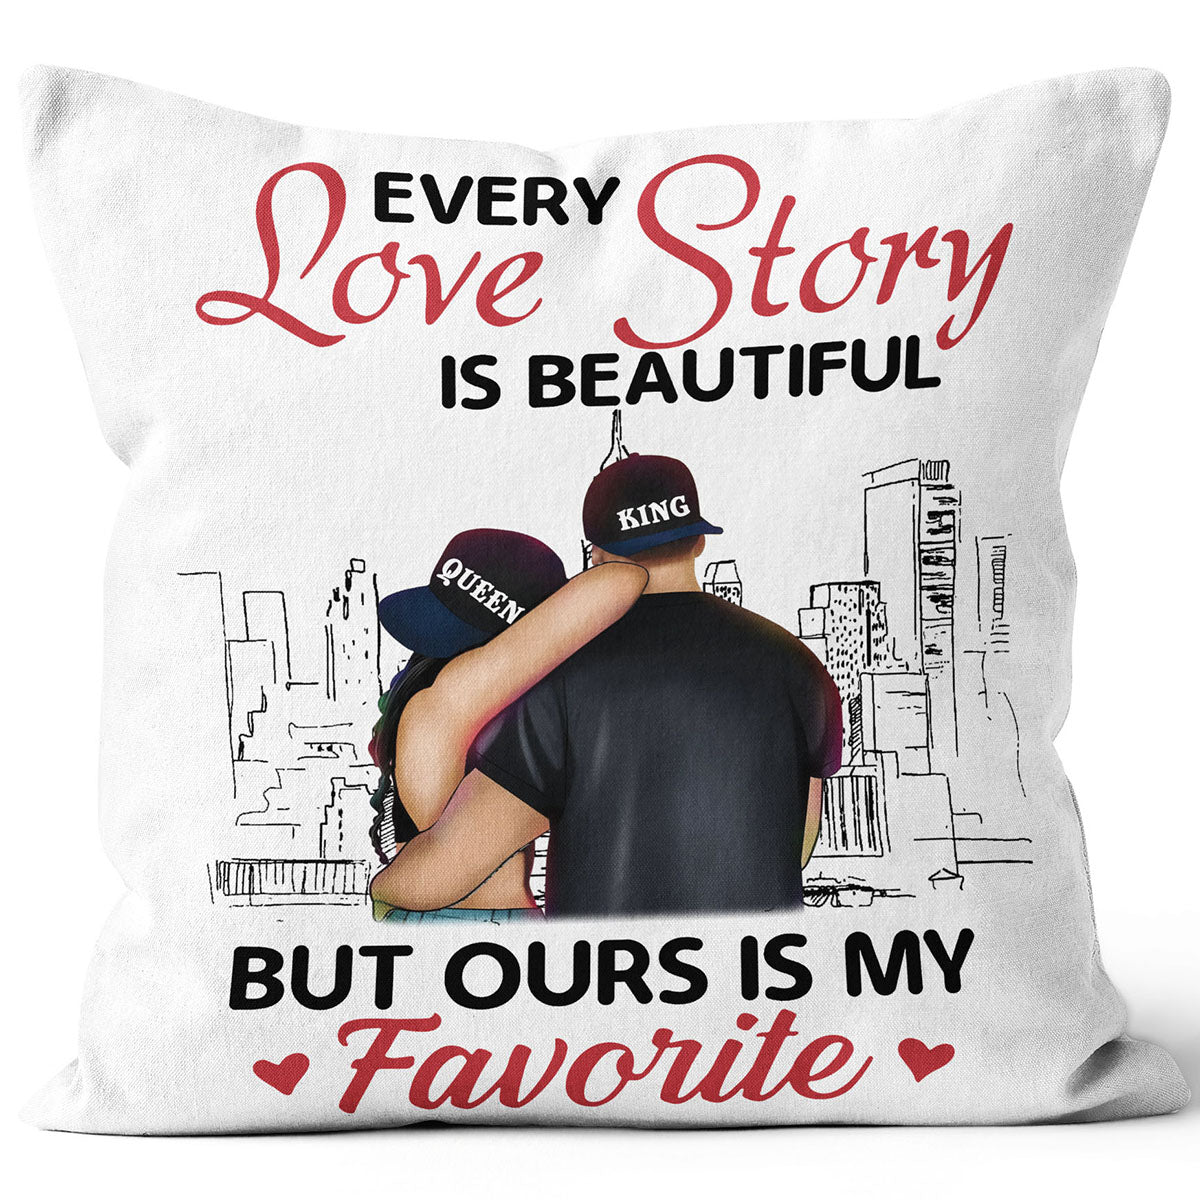 Every Love Story is Beautiful Throw Pillow, Personalized Pillow Gift ideas for Wife Husband